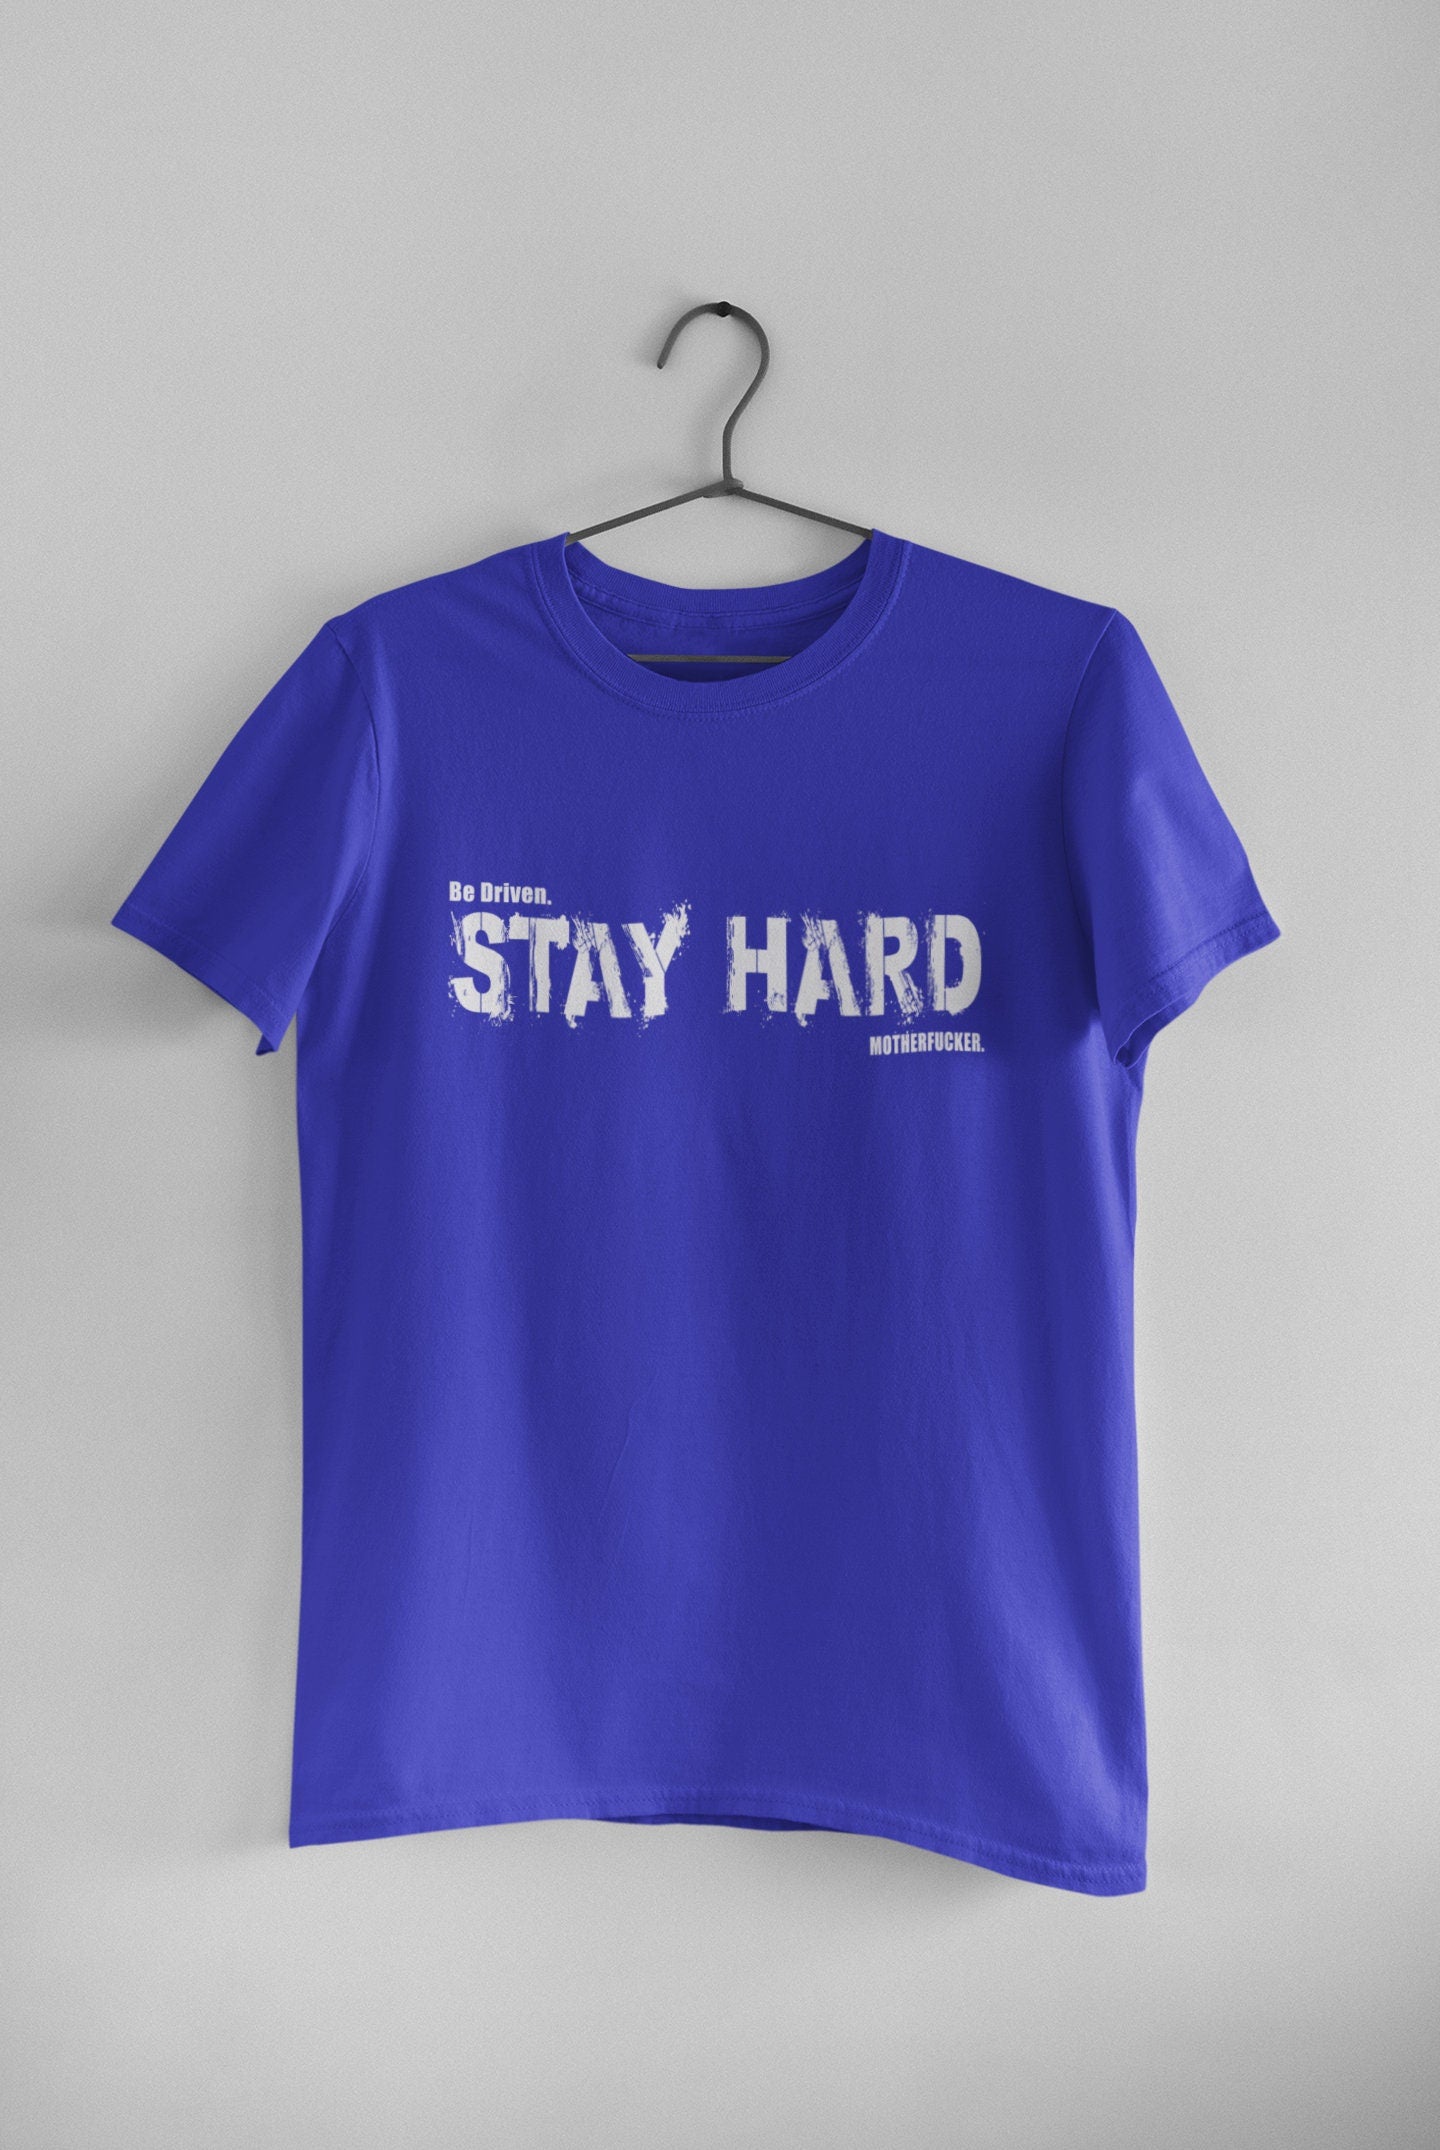 Be Driven. STAY HARD Motherfucker. Navy Seal TMF inspired graphic Ring Spun Cotton T Shirt and Tank Tops